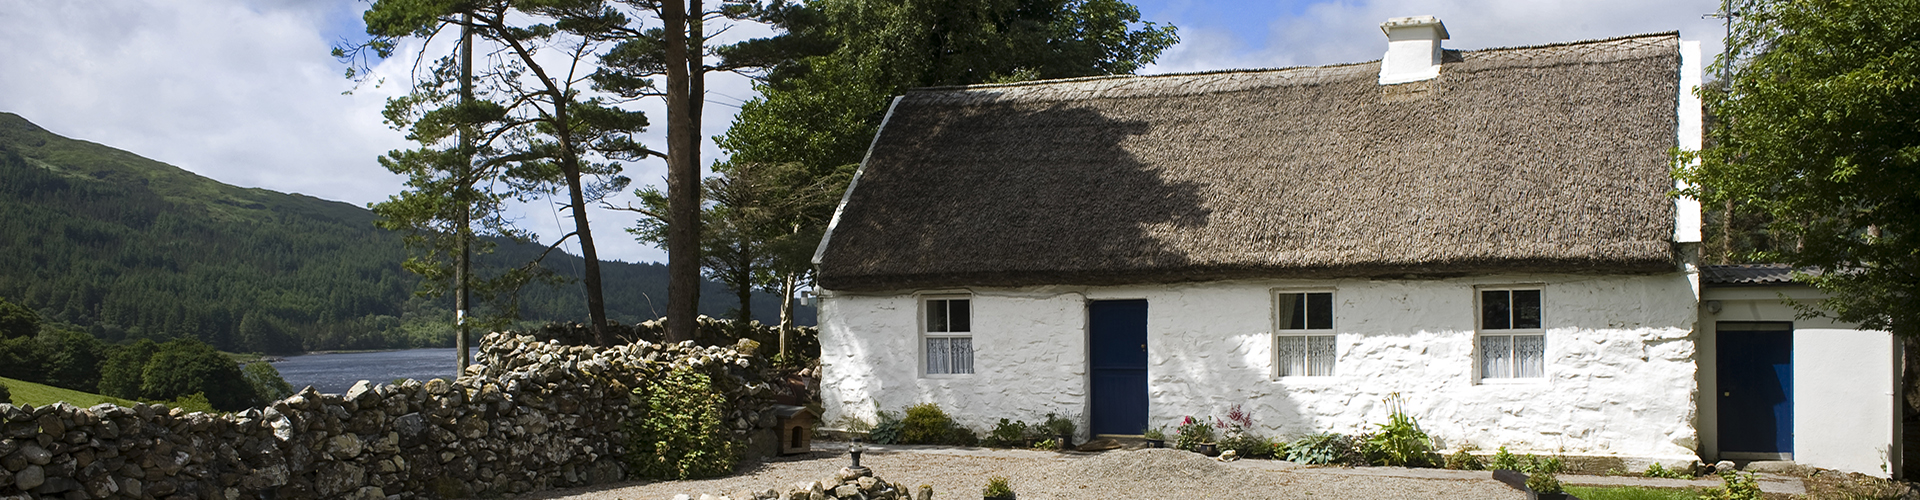 Mac Tours Ireland Home Page Crofters Cottage